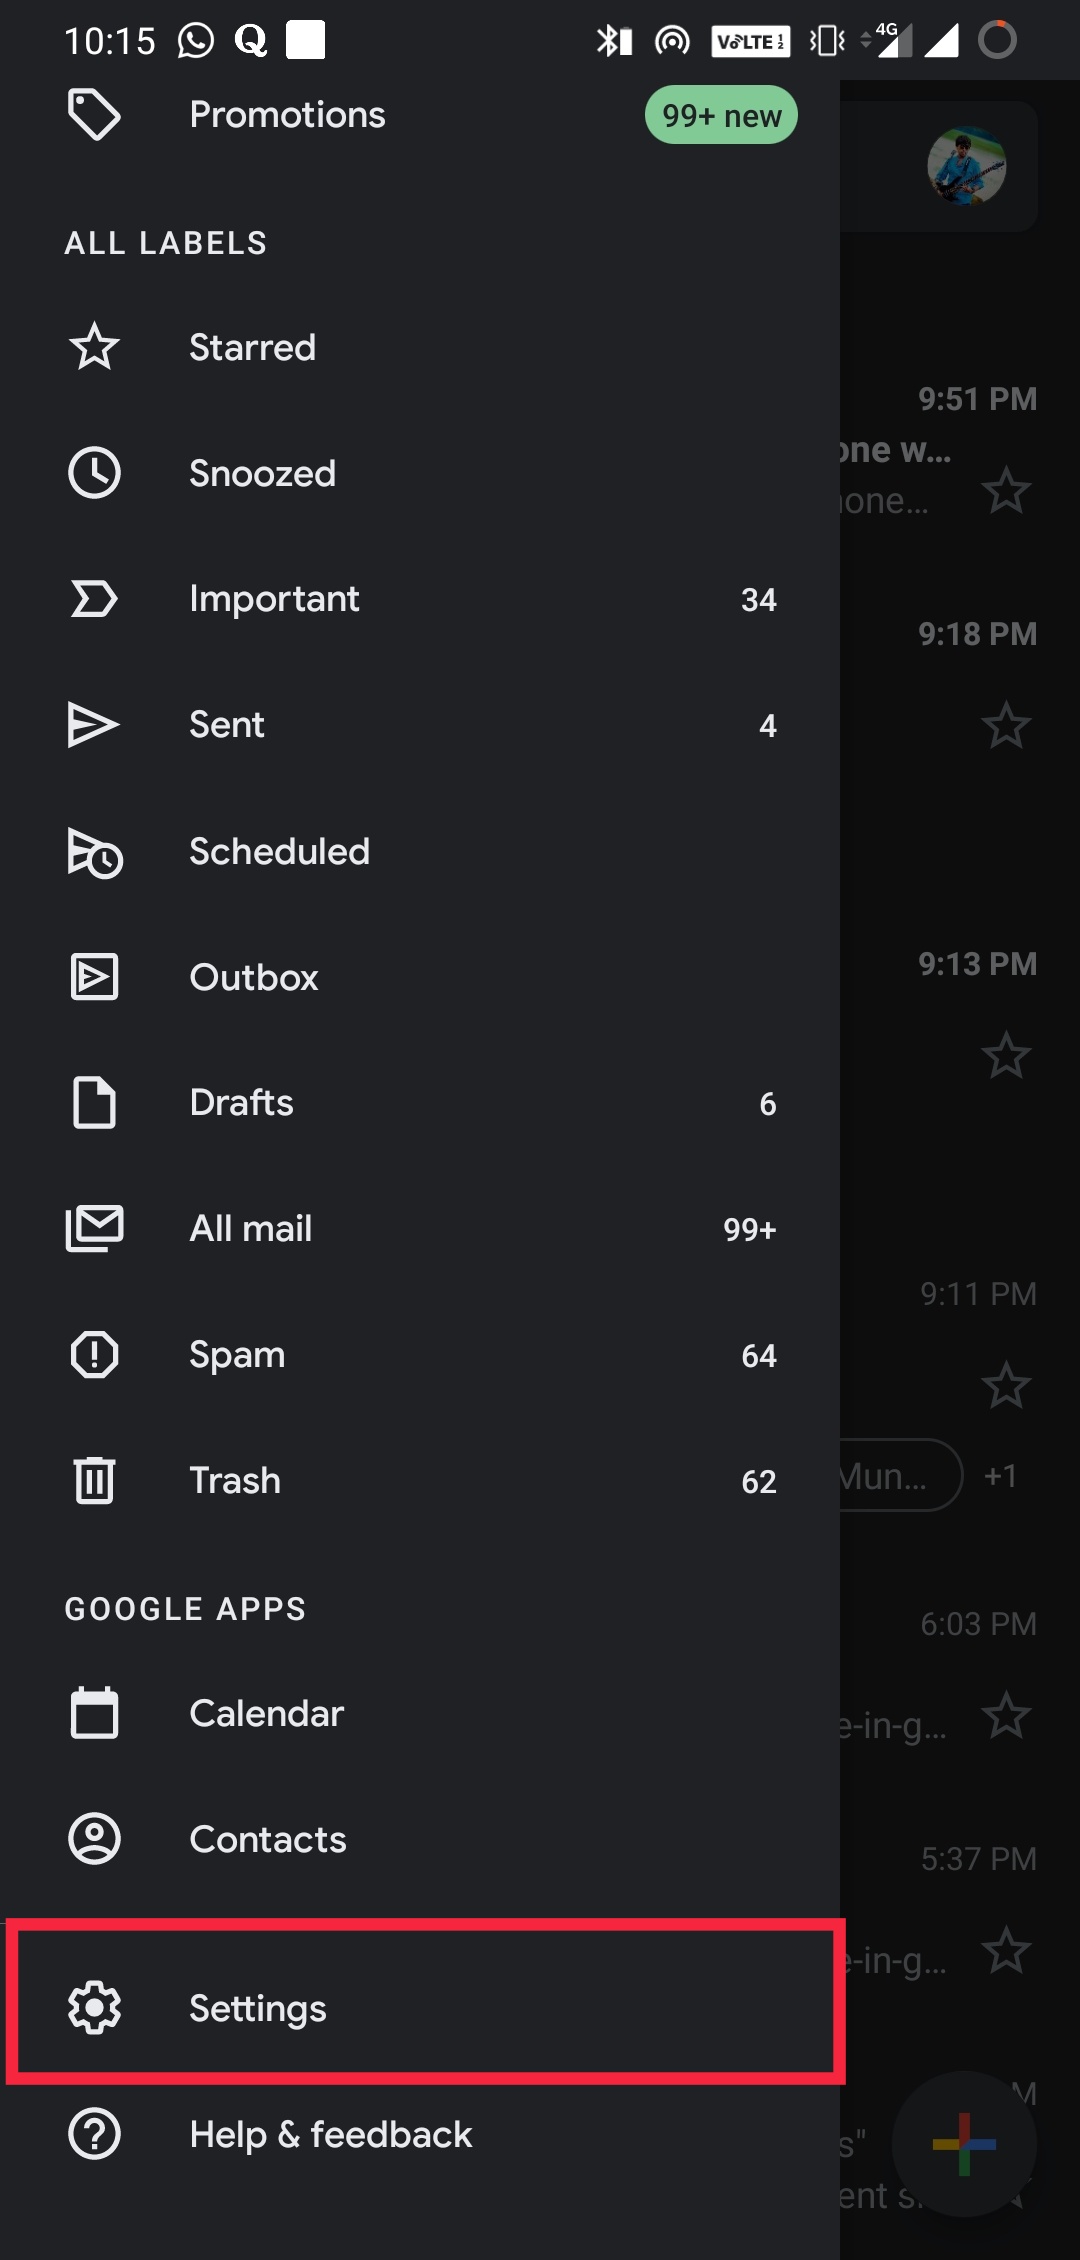 Enable Dark Mode in Gmail